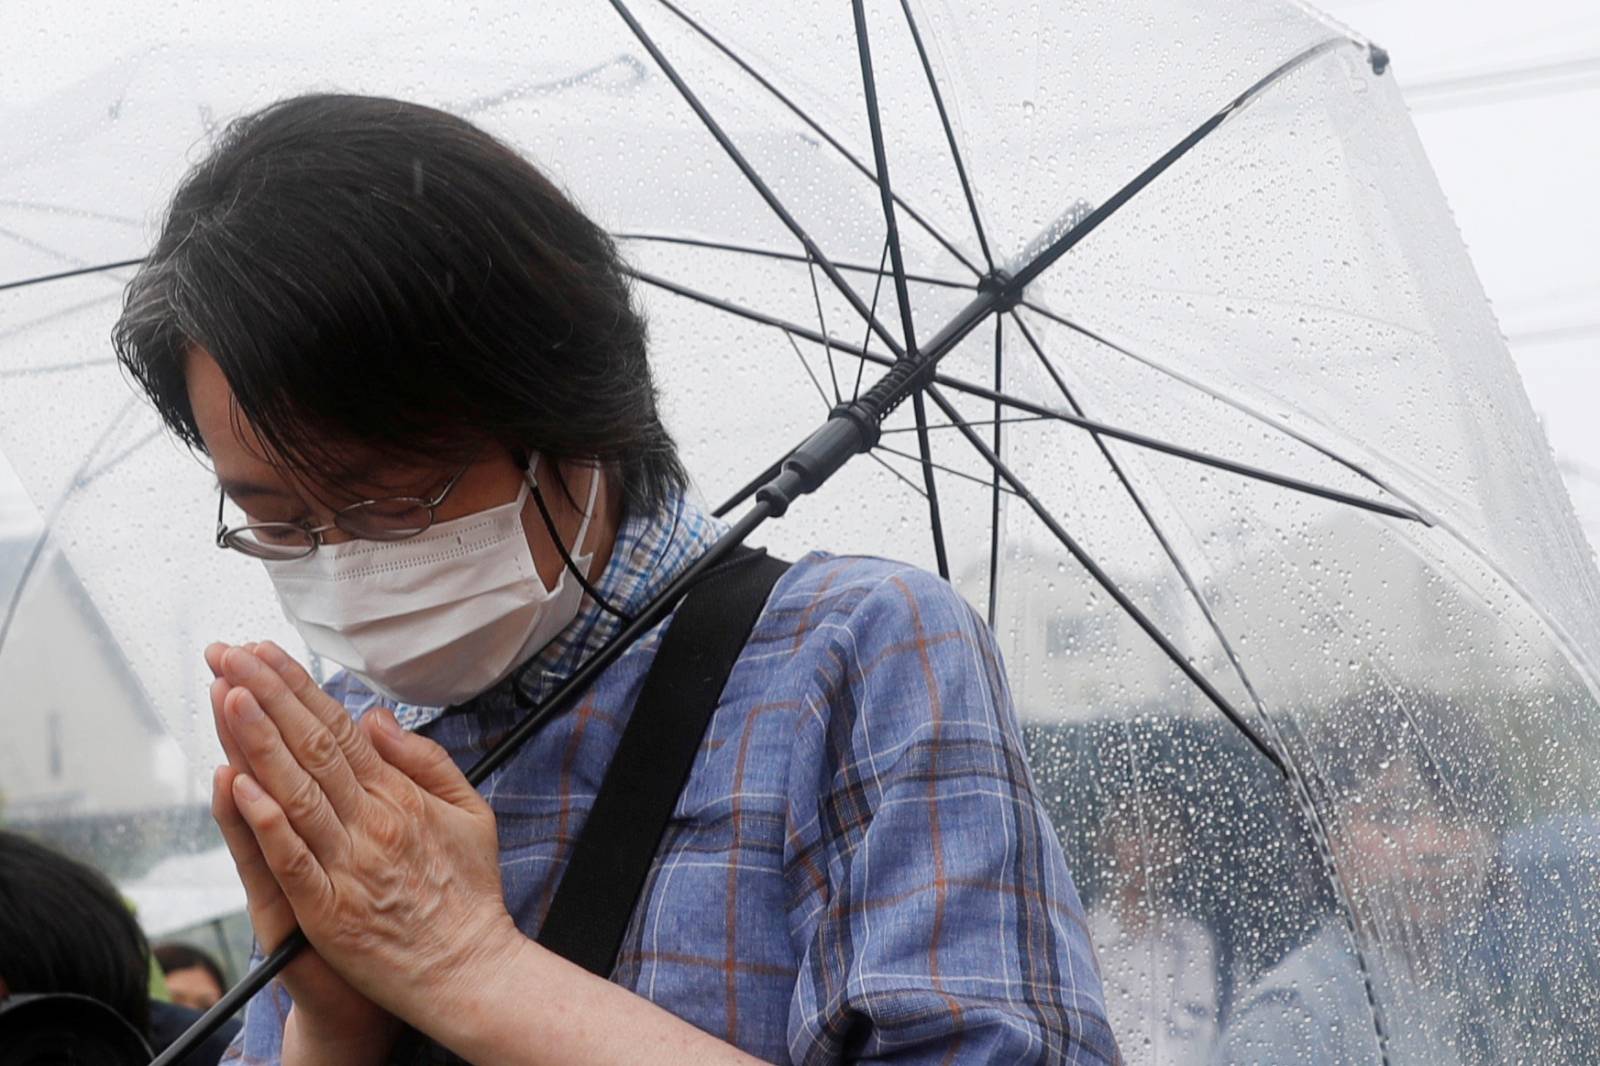 A woman prays for the victims of the arson attack in front of the torched Kyoto Animation building n Kyoto